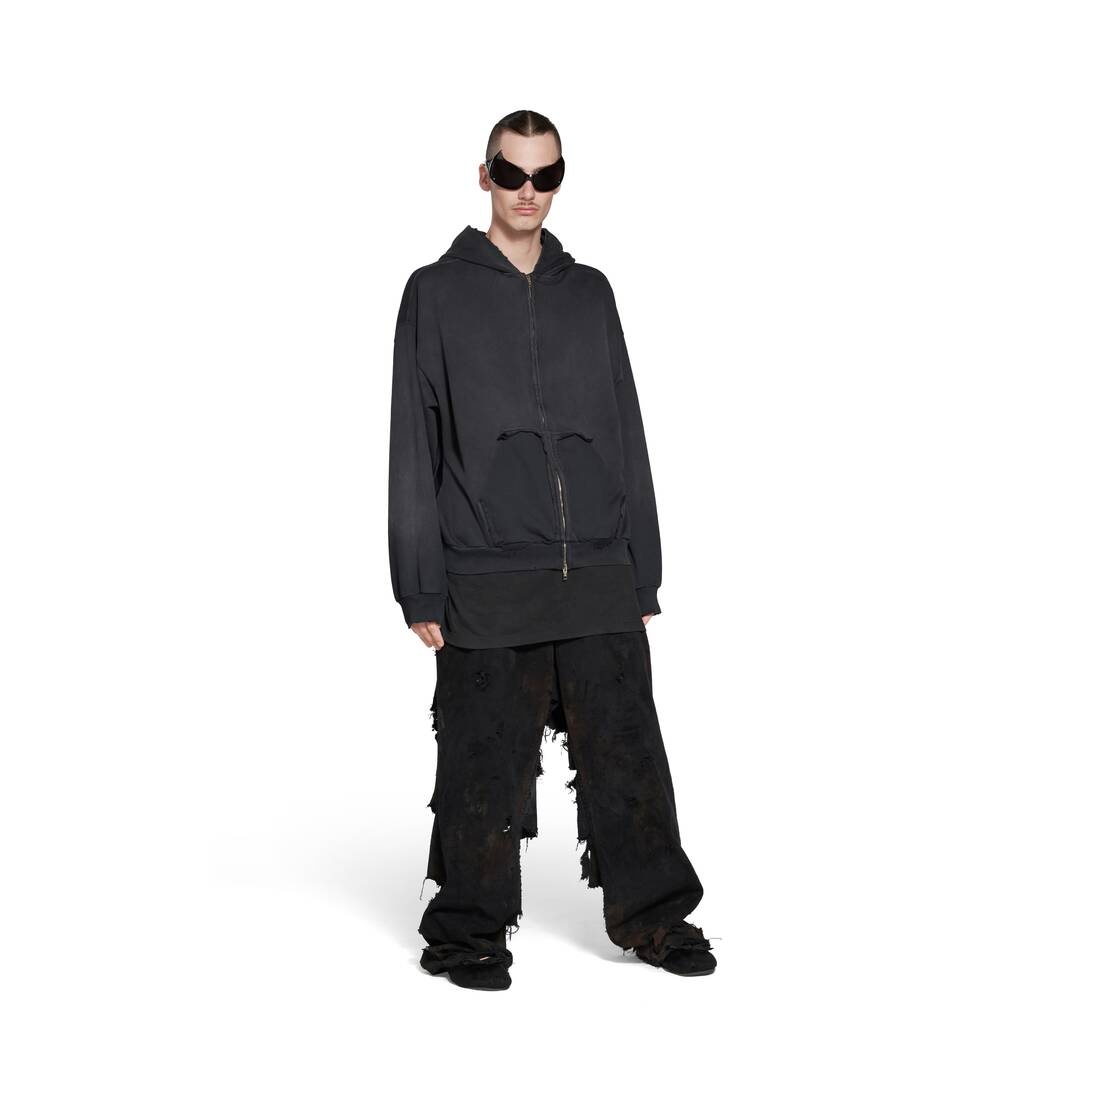 Tape Type Ripped Pocket Zip-up Hoodie Large Fit in Black Faded - 2